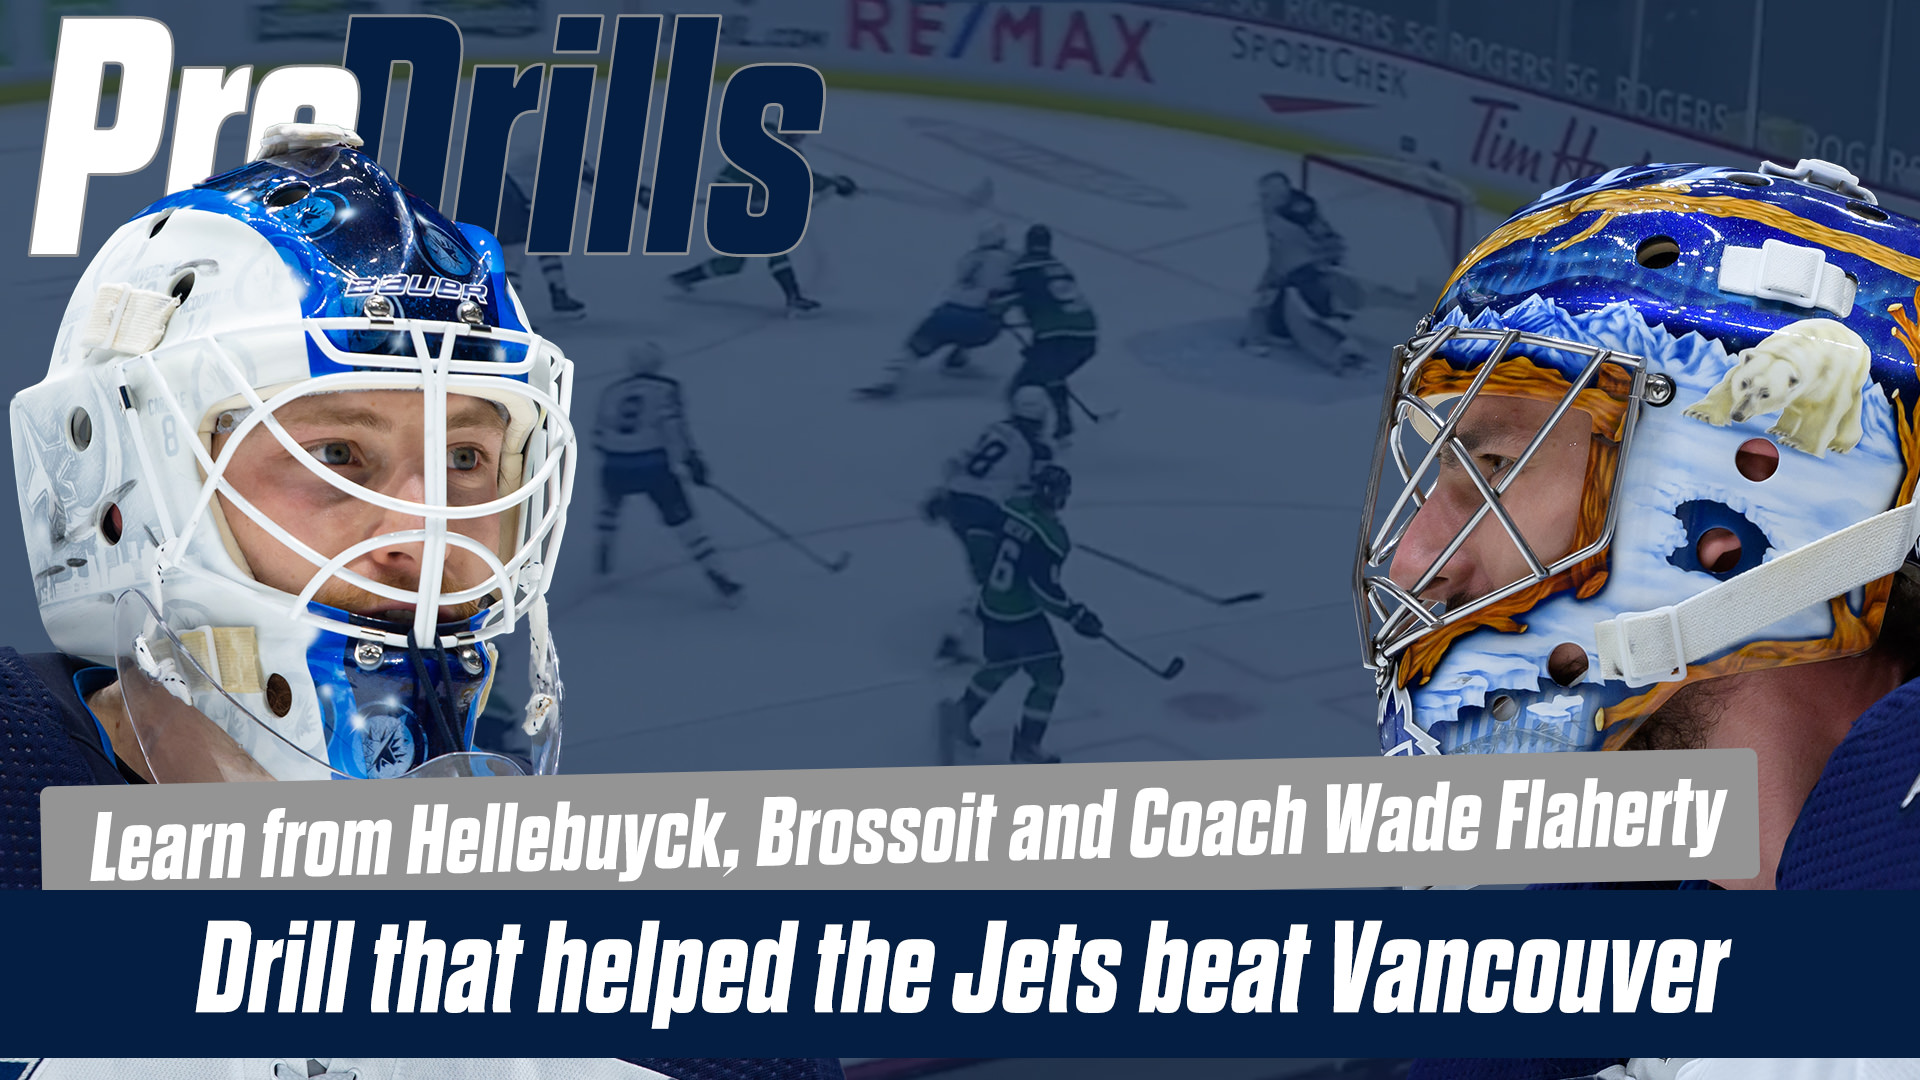 Brossoit Flaherty, Helleybuyck and the lateral drill that won Jets a game